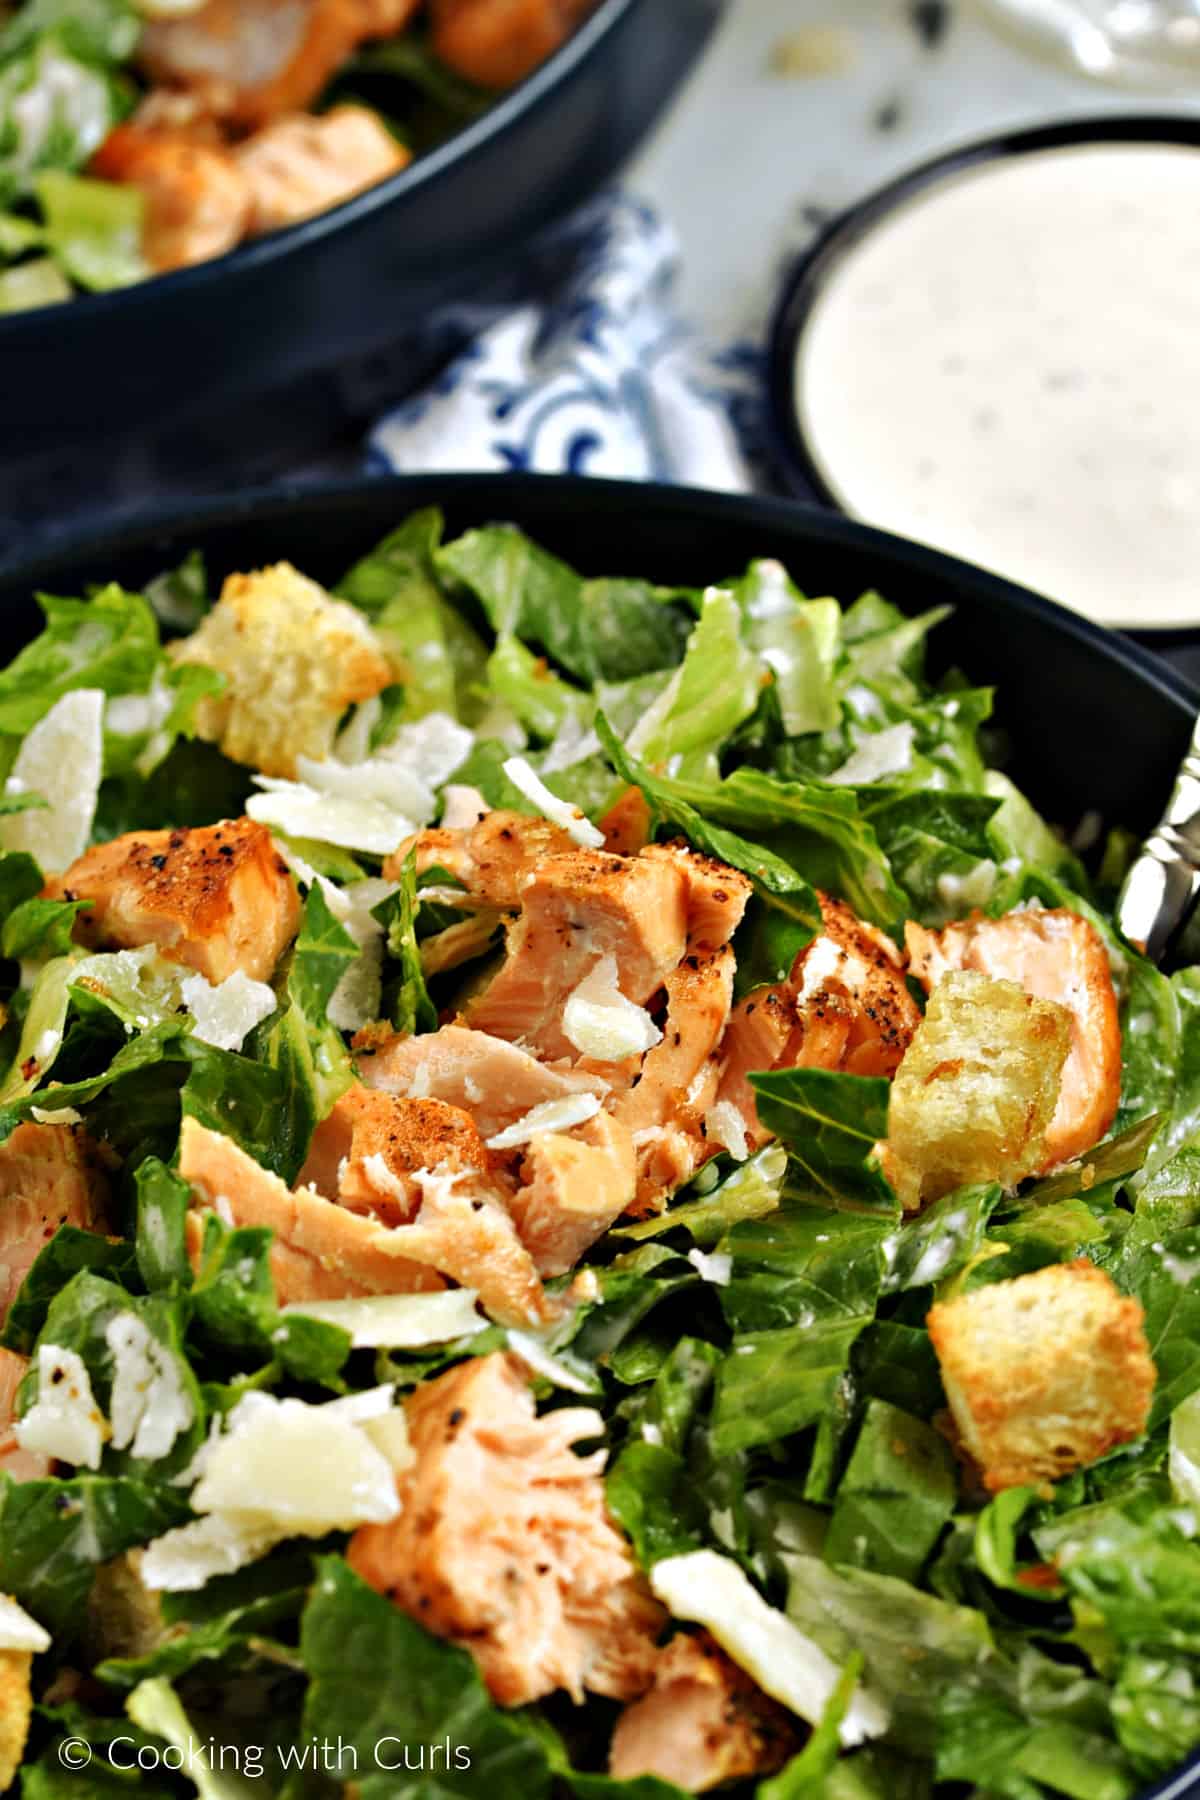 Chopped salmon on top of romaine lettuce, croutons, shaved parmesan and Caesar dressing with a small bowl of dressing on the side.